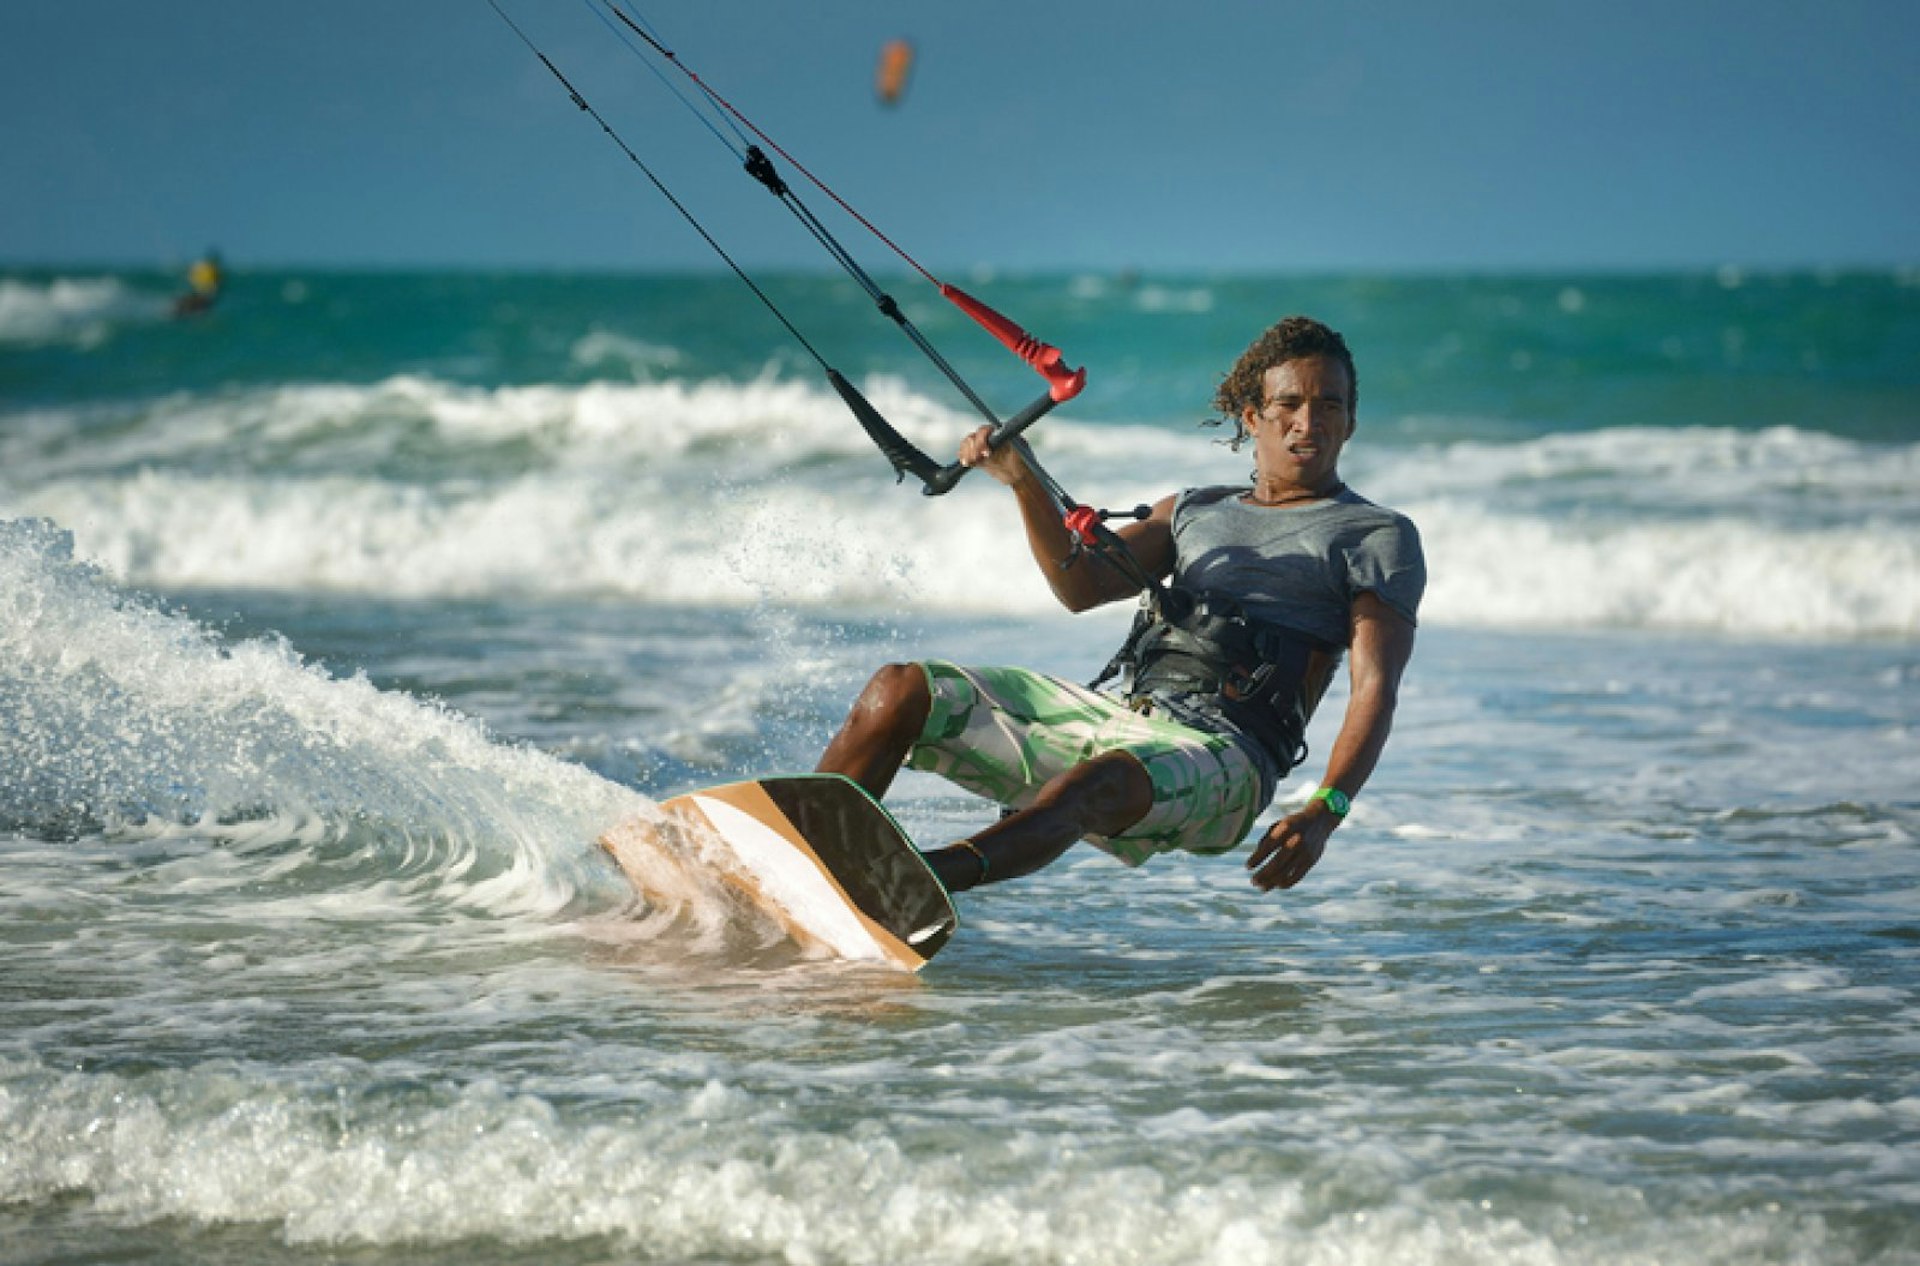 A male kitesurfer with long hair leans away from his board with one hand holding on to the handle of his kite equipment